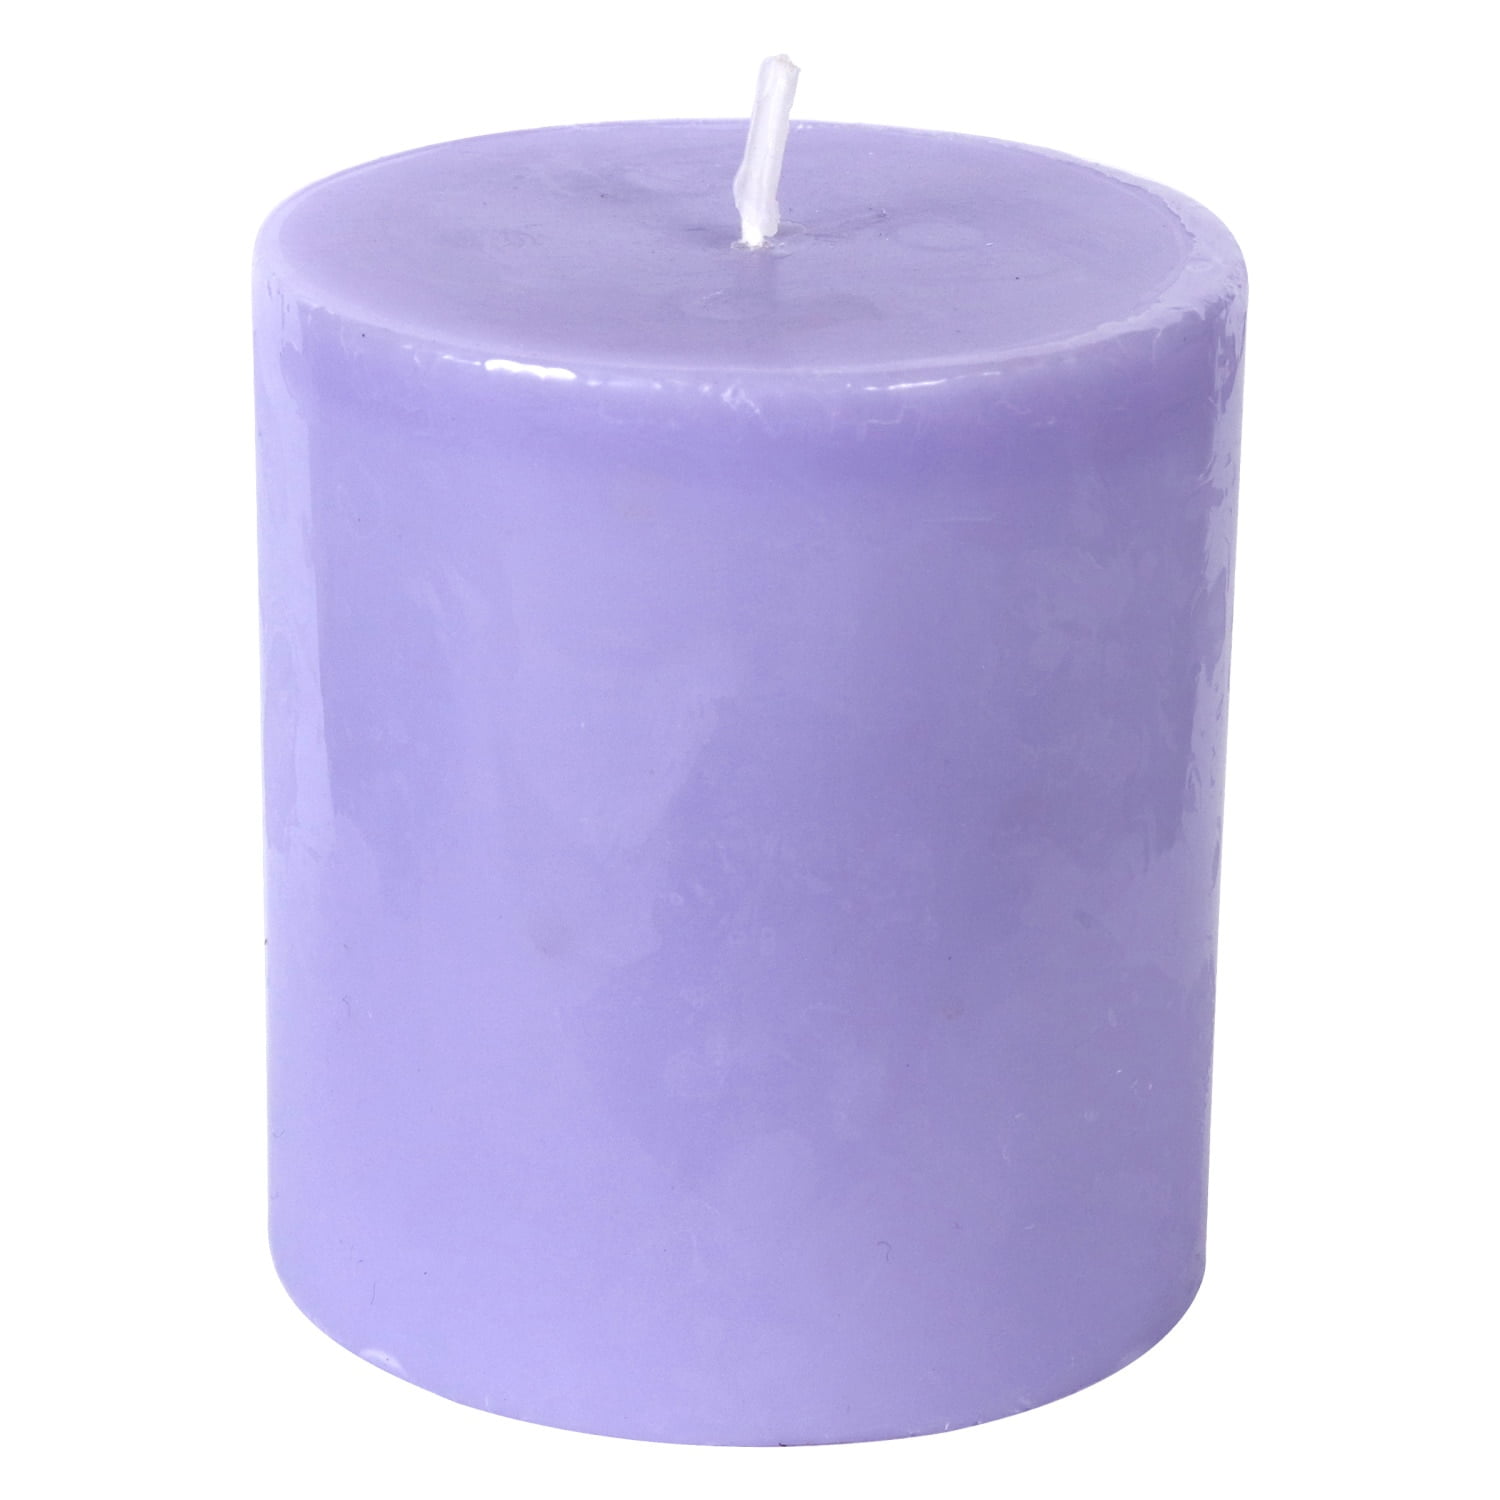 12 Scented Lavender Votive Tumbler Candles Free Shipping 